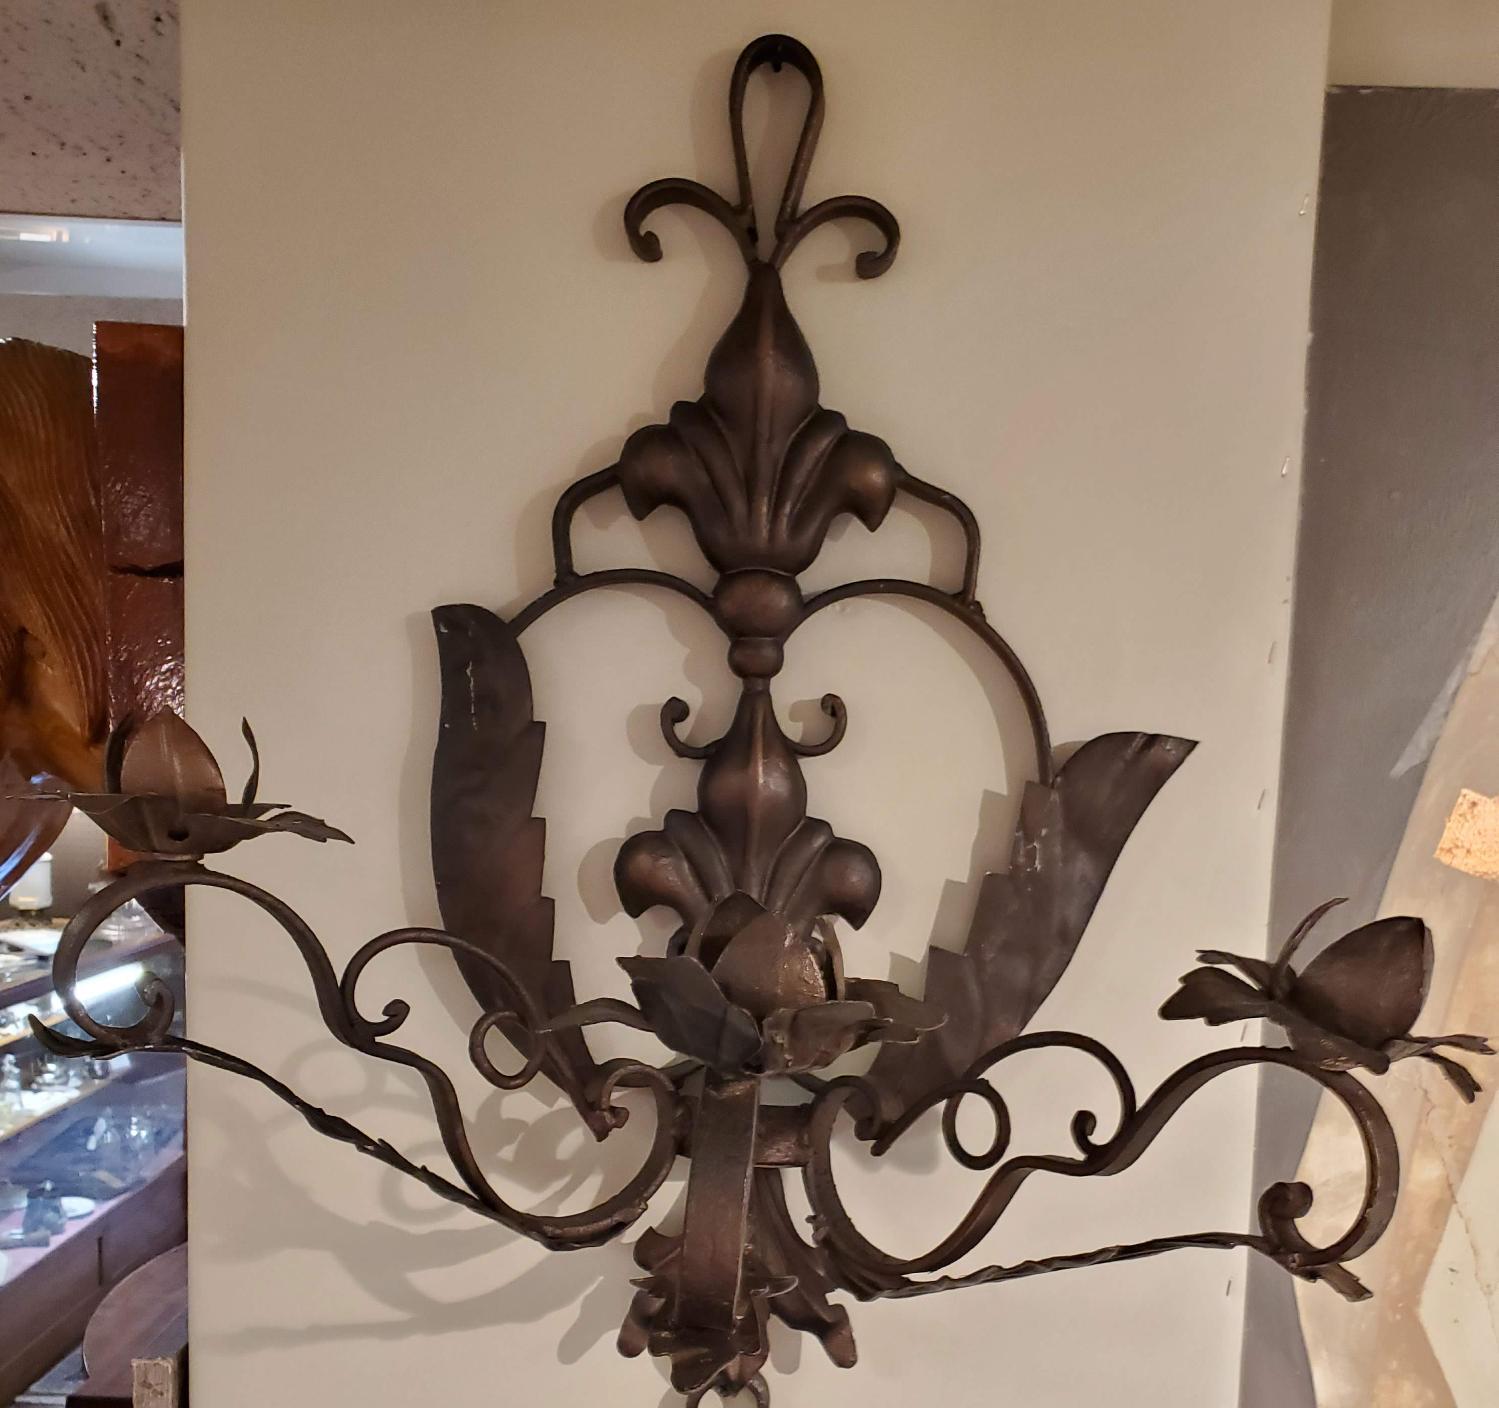 Pair of Large Scale Late 19th Century Italian Metal Wall Sconces with Leaf Motif In Good Condition For Sale In Middleburg, VA